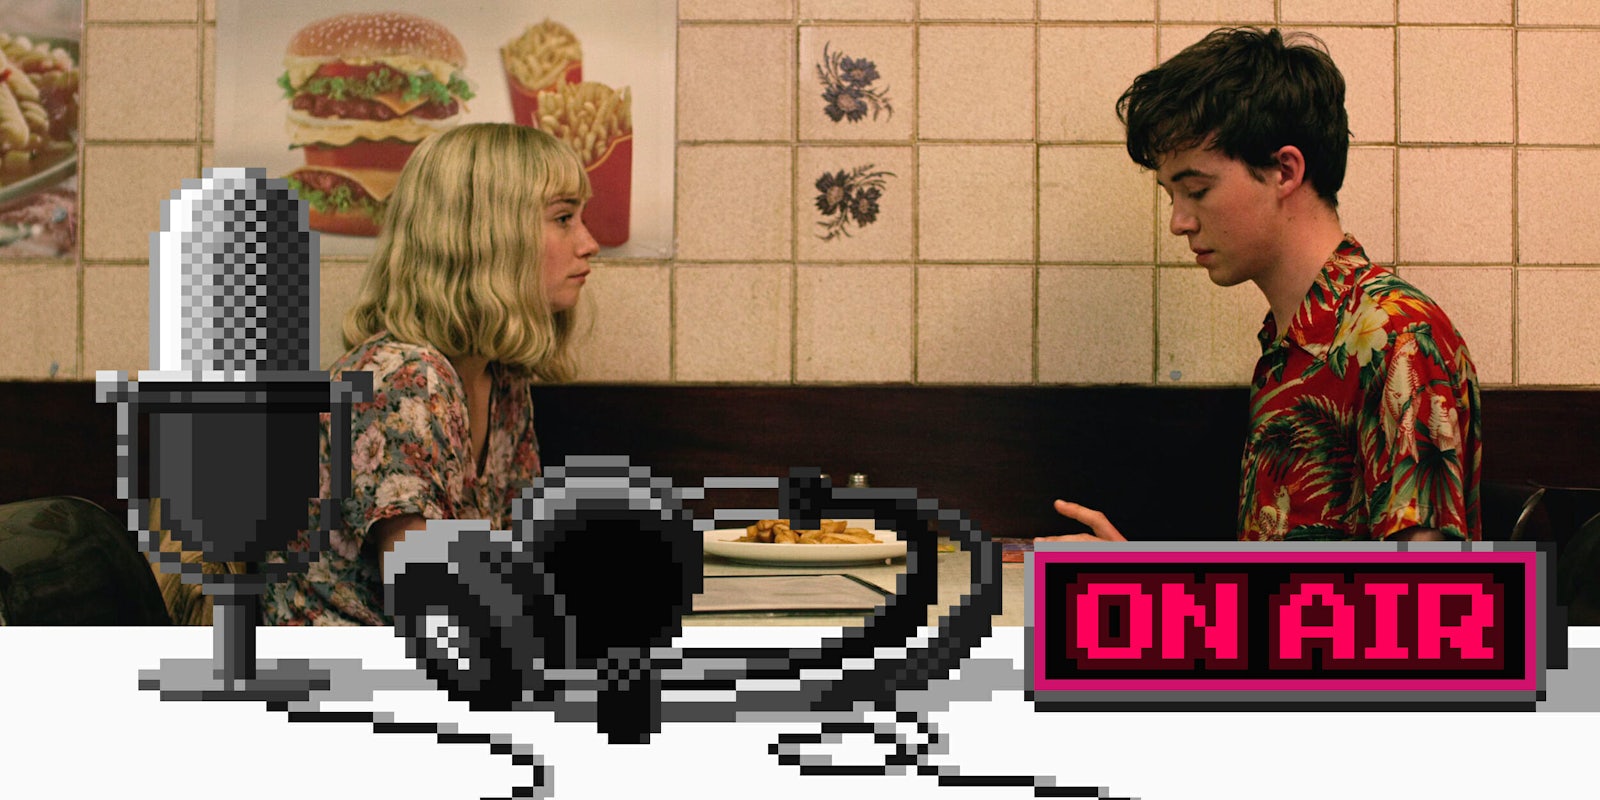 Upstream podcast discusses The End of the F***ing World